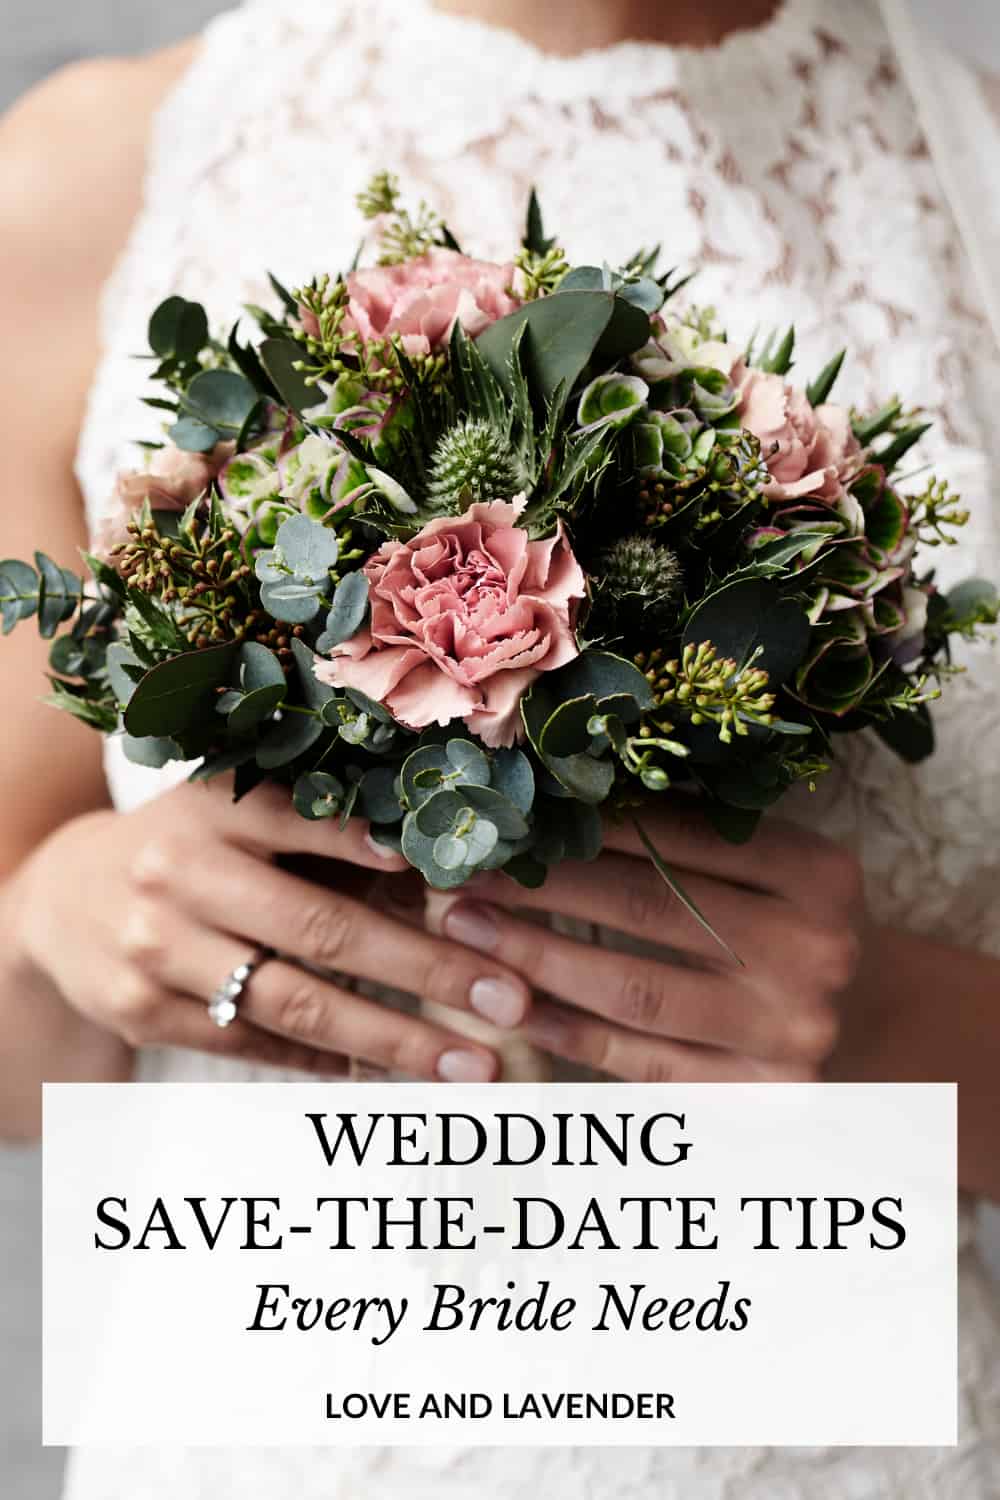 Wedding Save-the-Date Tips Every Bride Needs - Pinterest pin